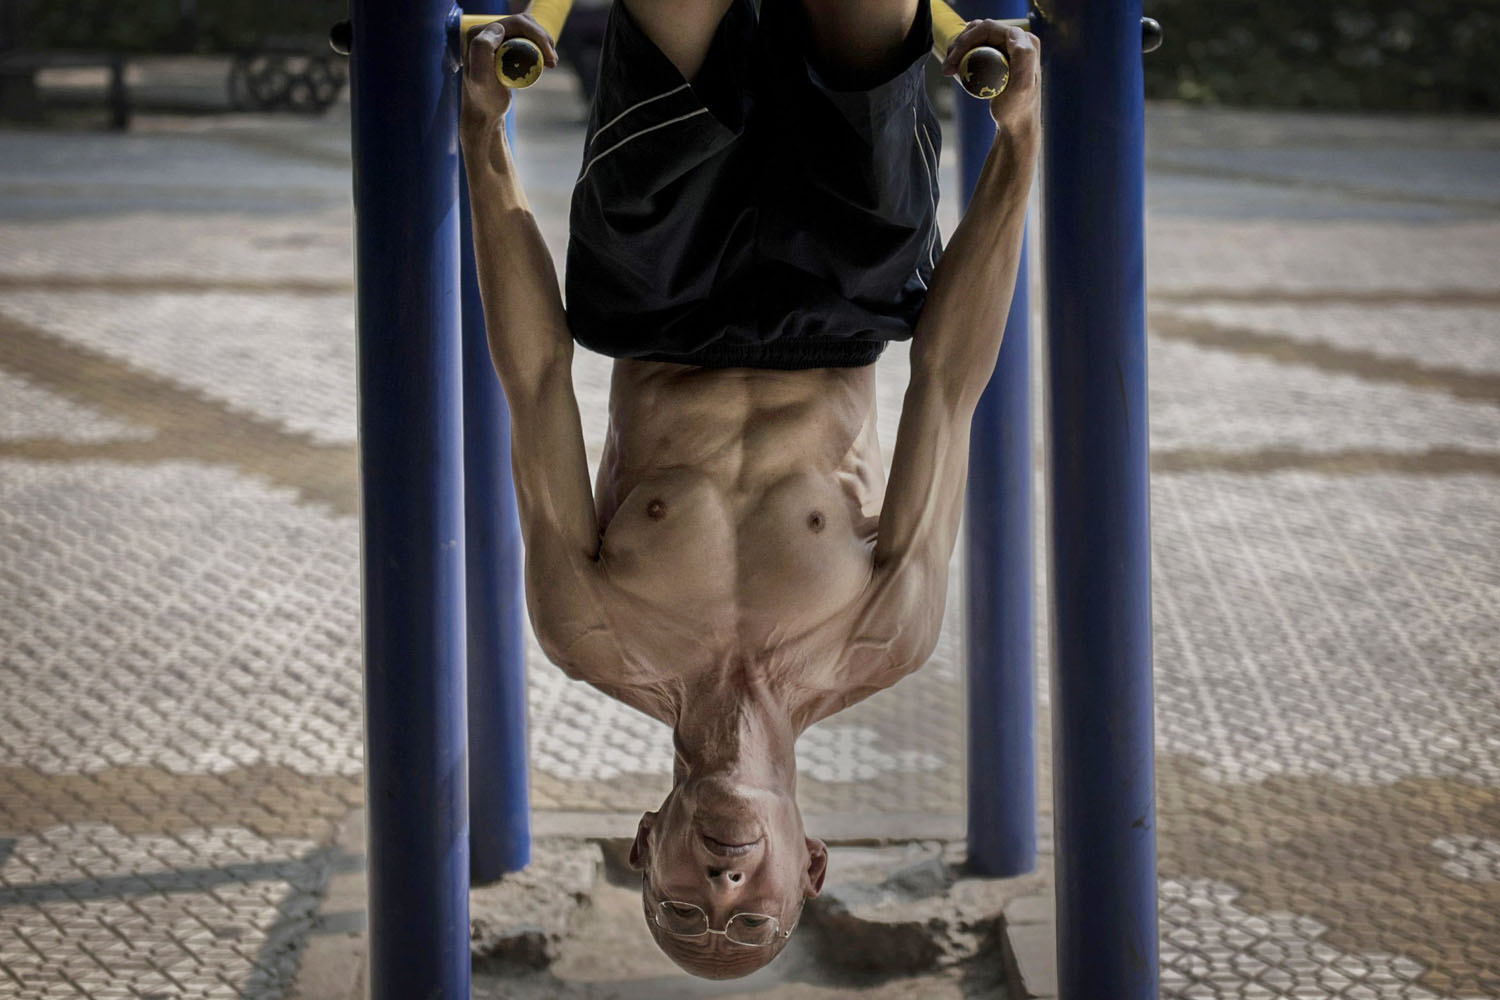 Sept. 10, 2014.  A Chinese man holds himself upside down as he exercises on bars at a park in Beijing, China.